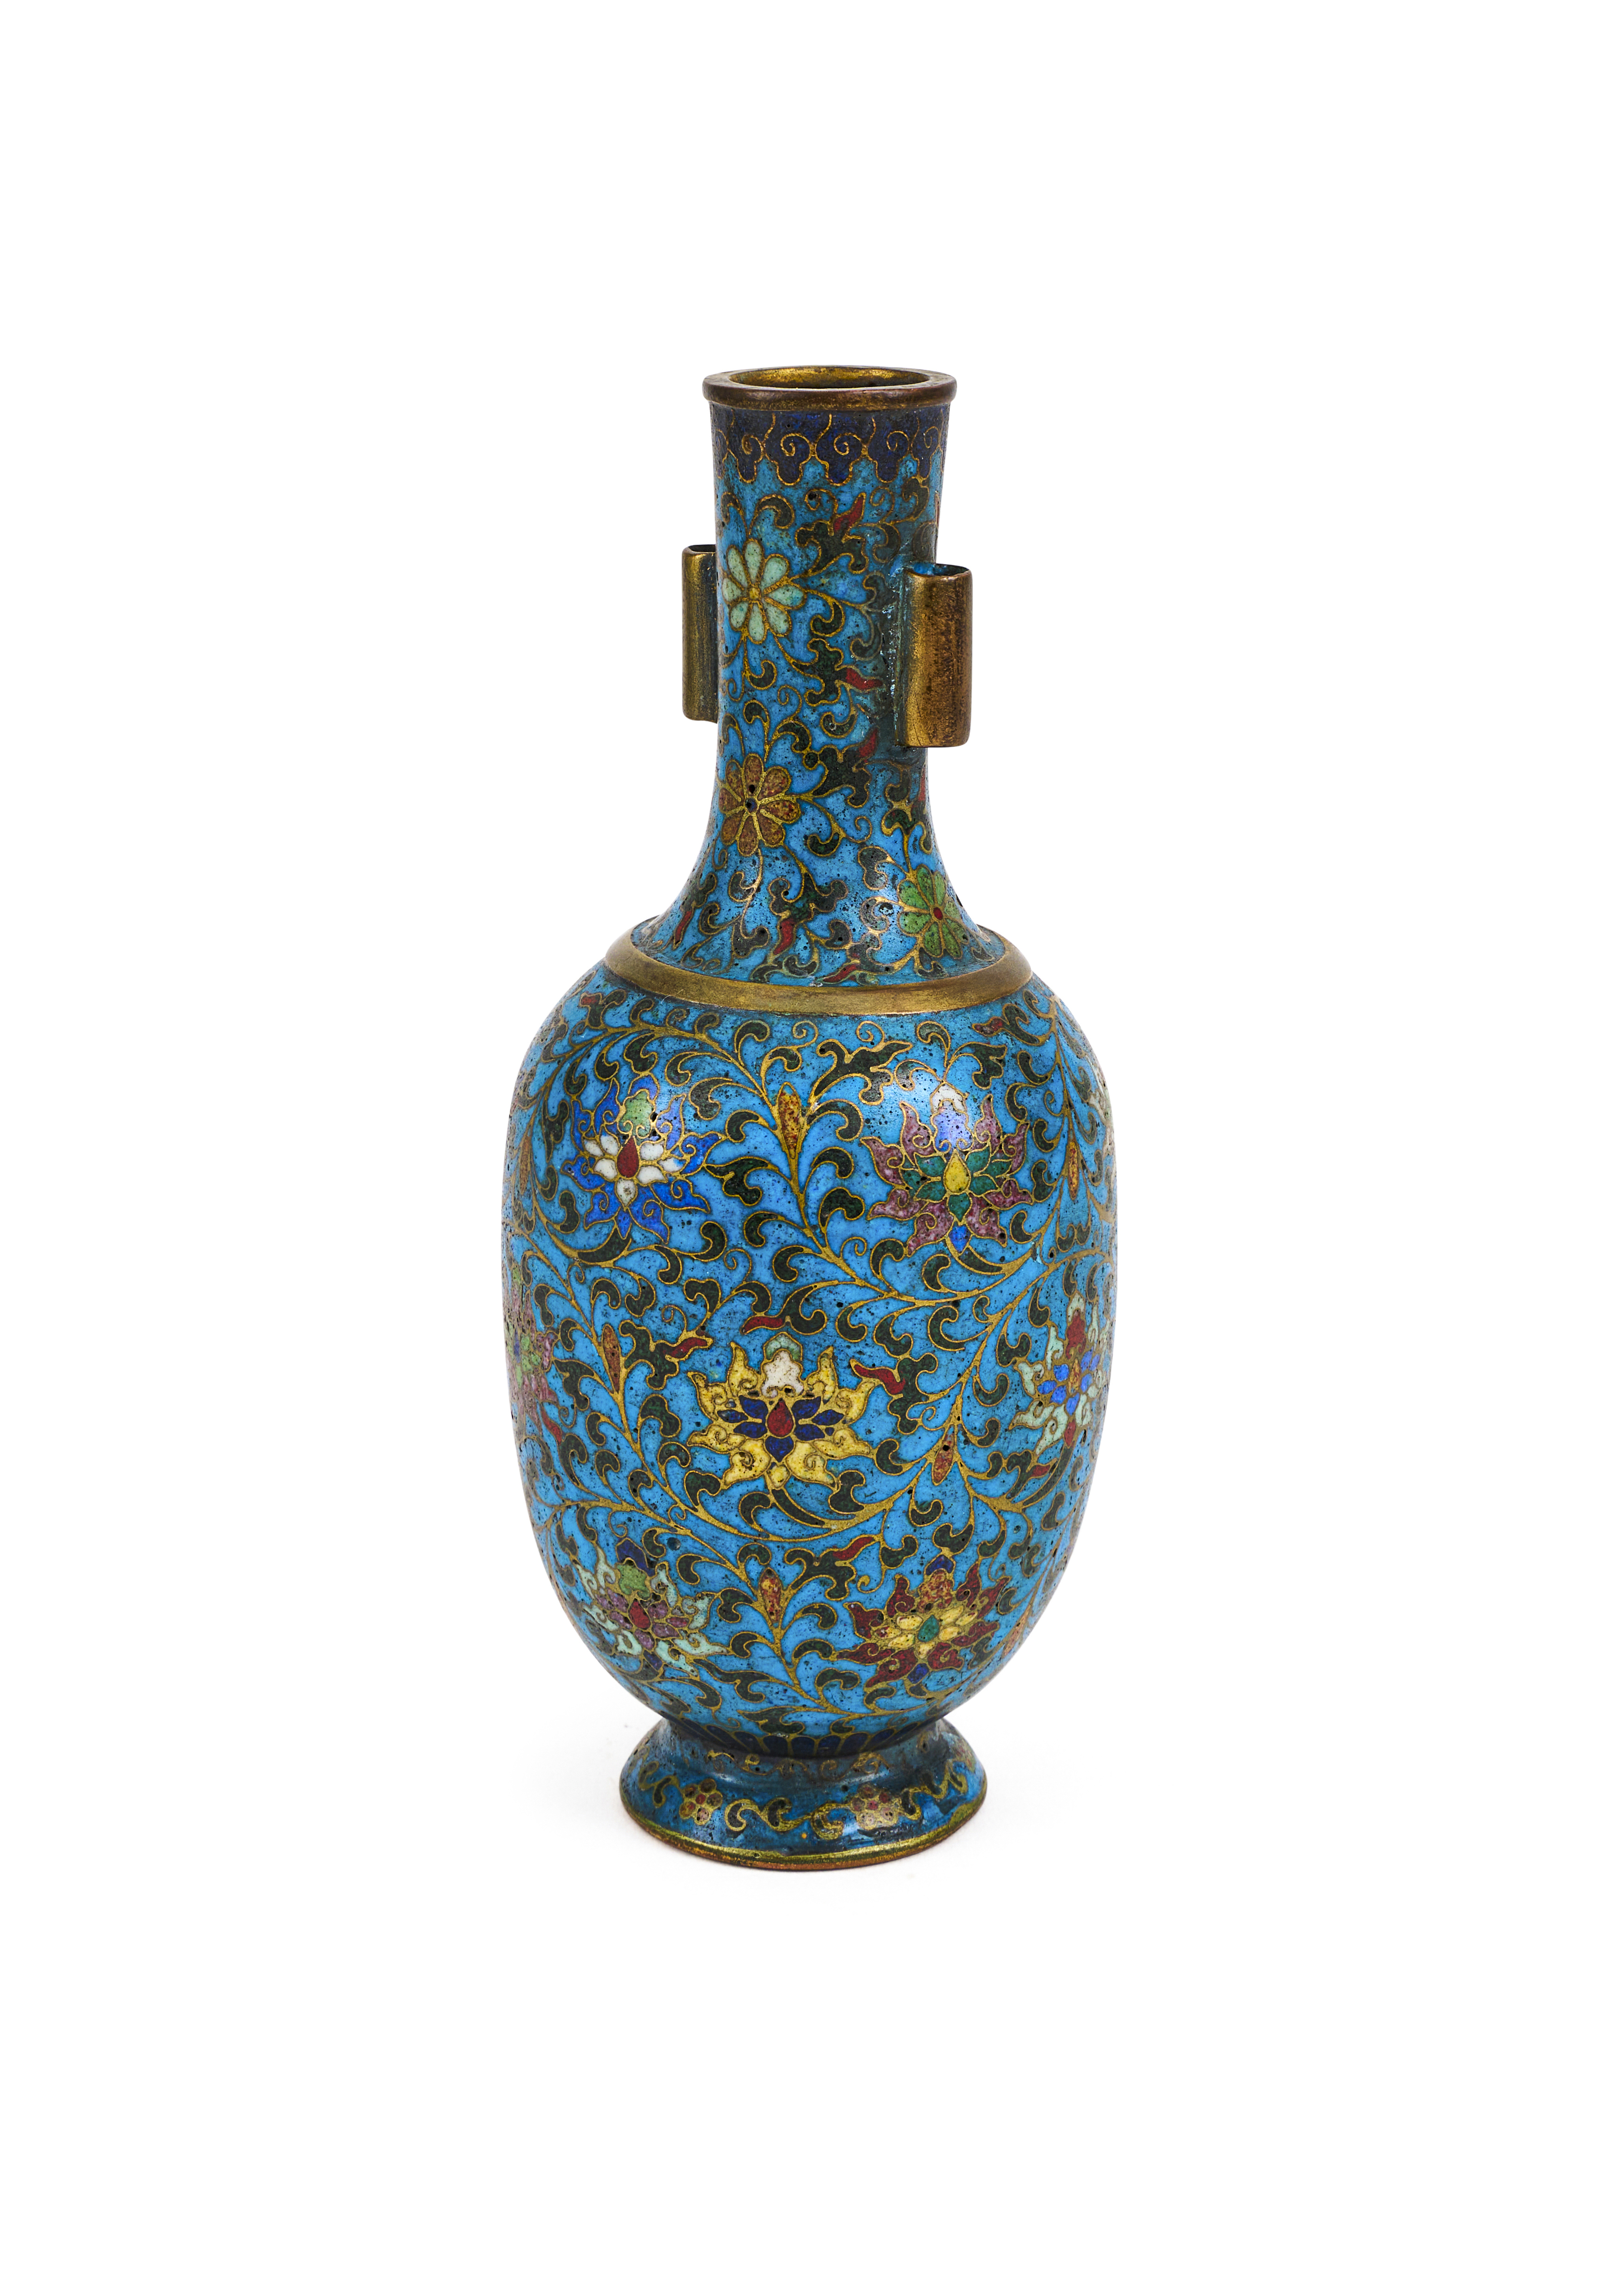 A CHINESE CLOISONNE VASE, QING DYNASTY (1644-1911) - Image 2 of 4